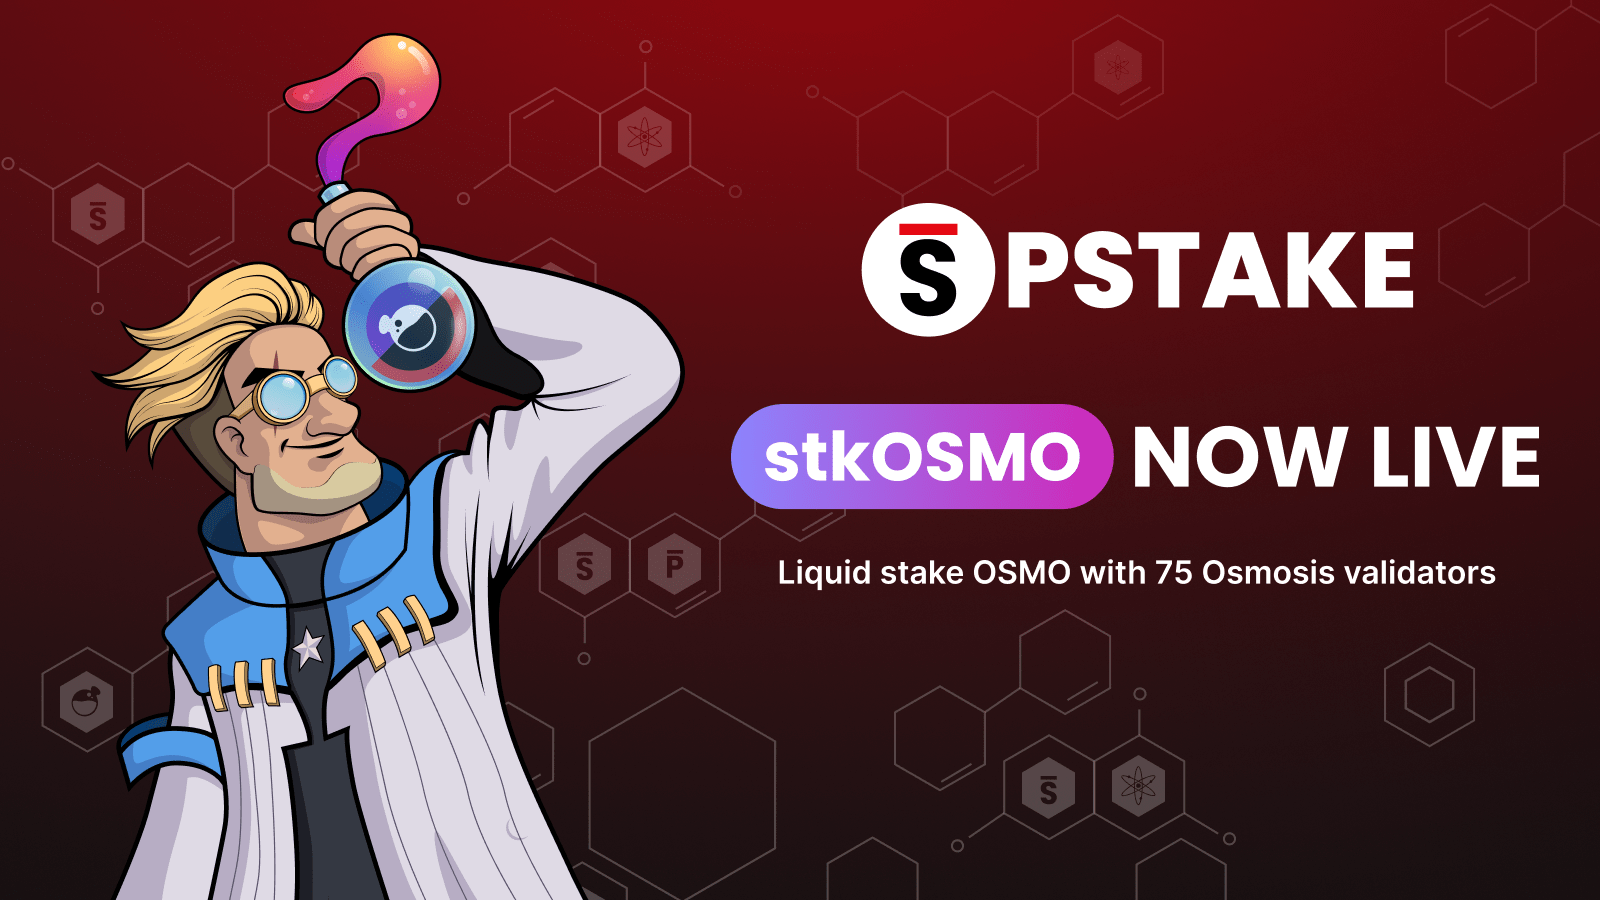 OSMO liquid staking with stkOSMO by pSTAKE